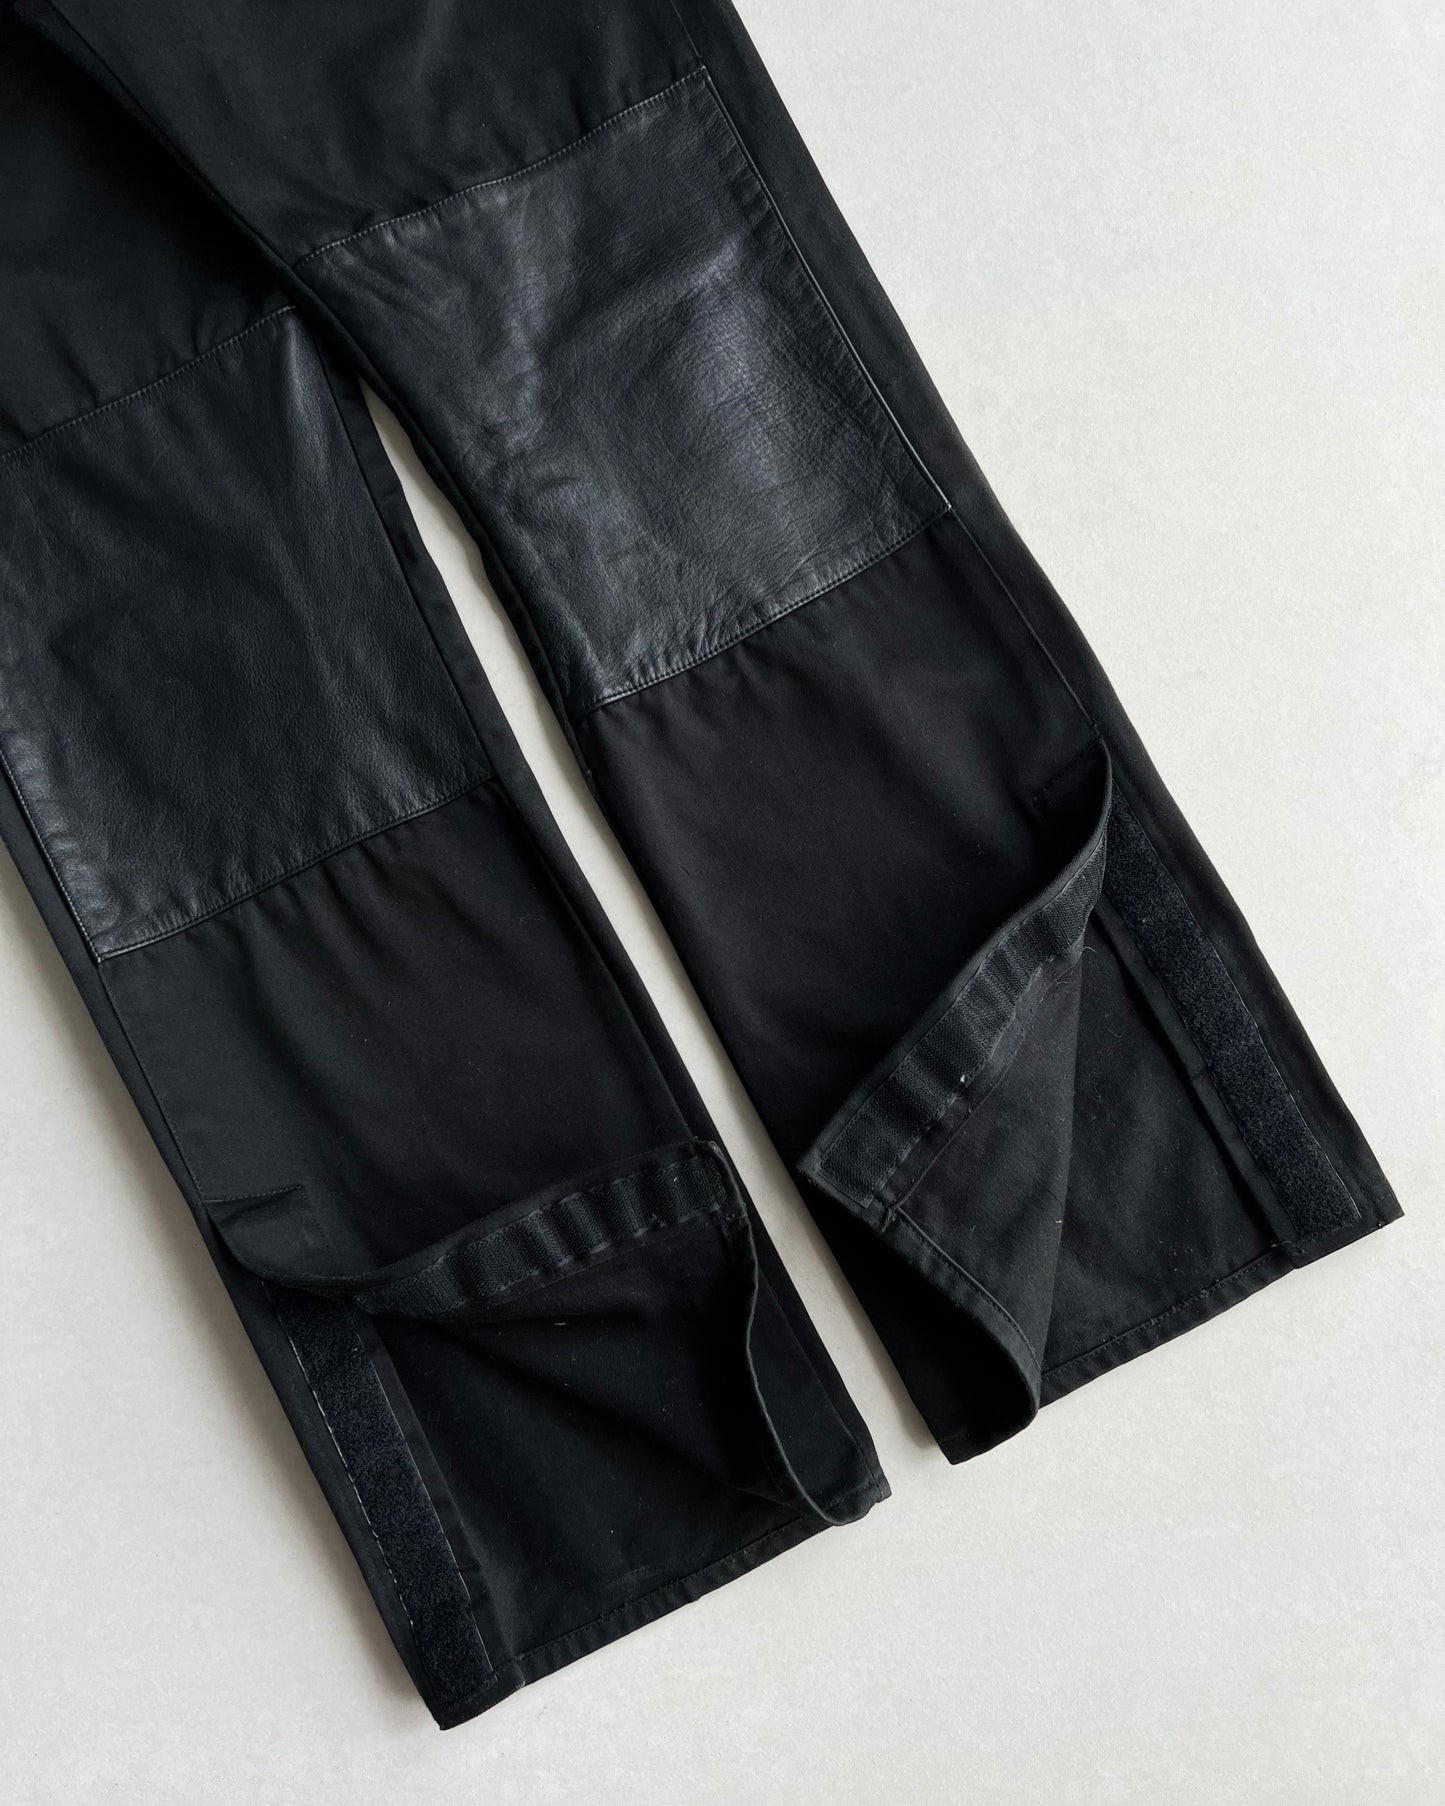 2000S BLACK LEATHER DOUBLE KNEE FLARE TROUSERS (32X32)